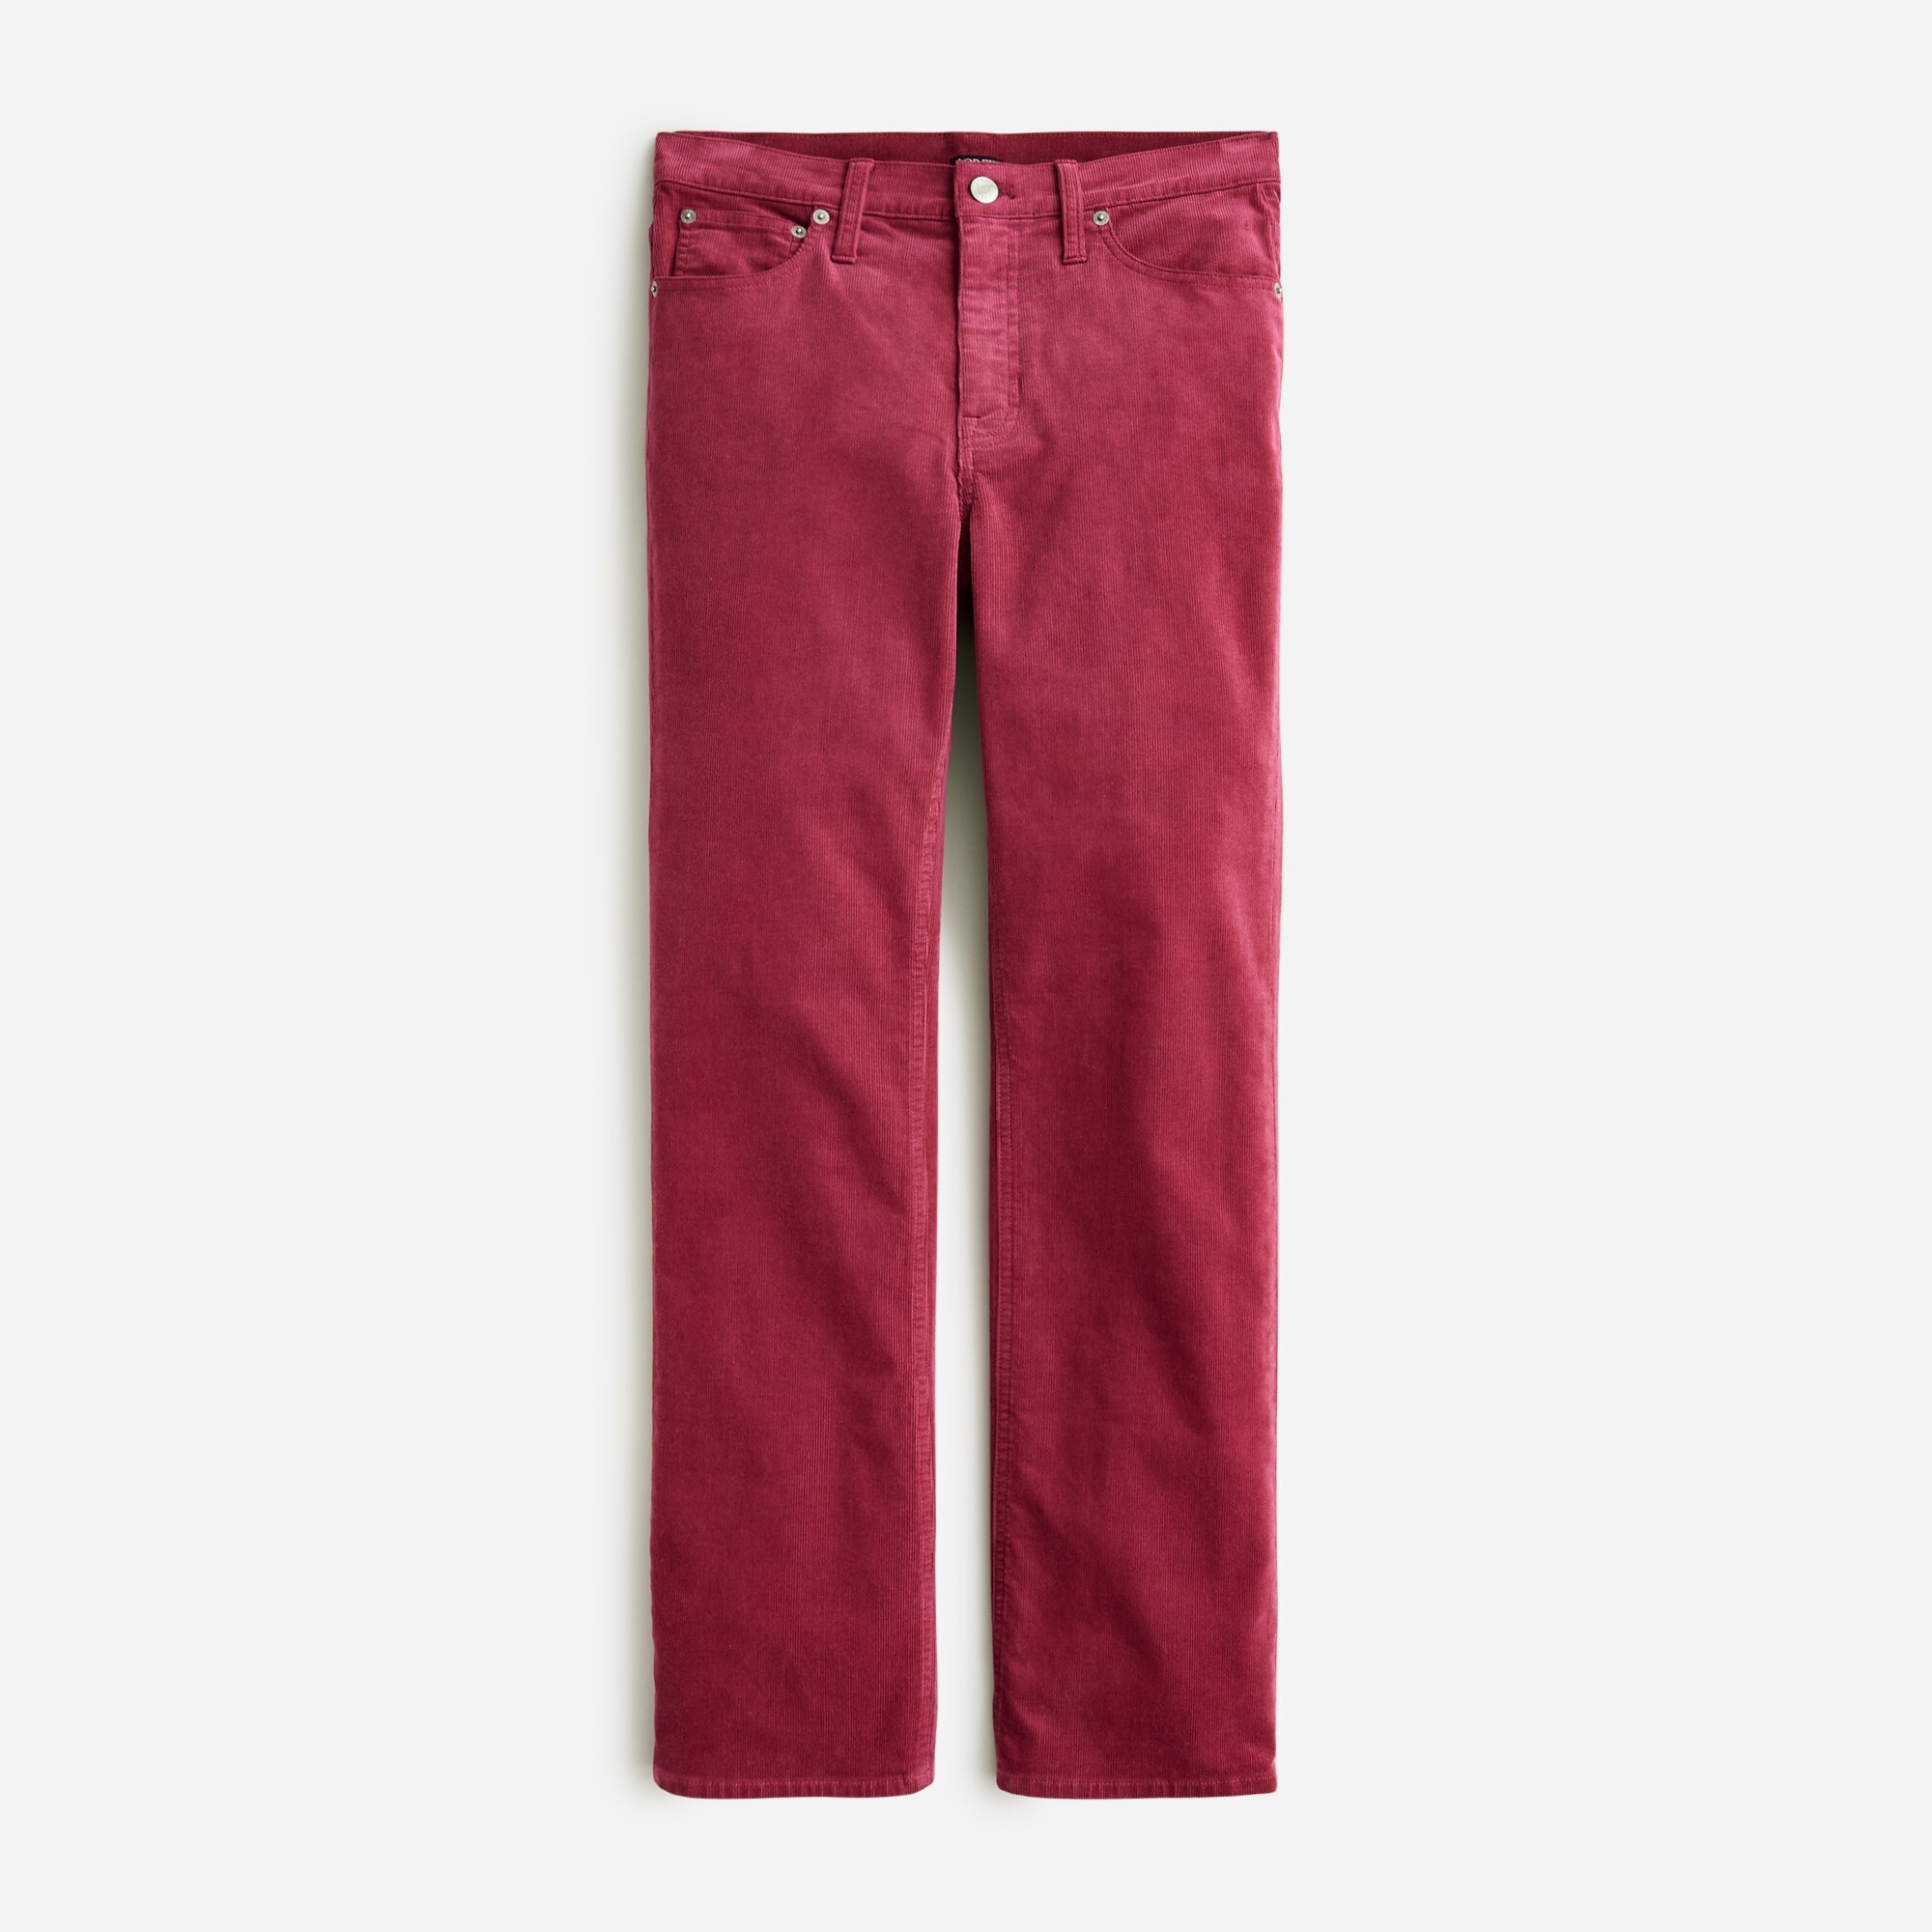  Tall high-rise slim demi-boot pant in corduroy